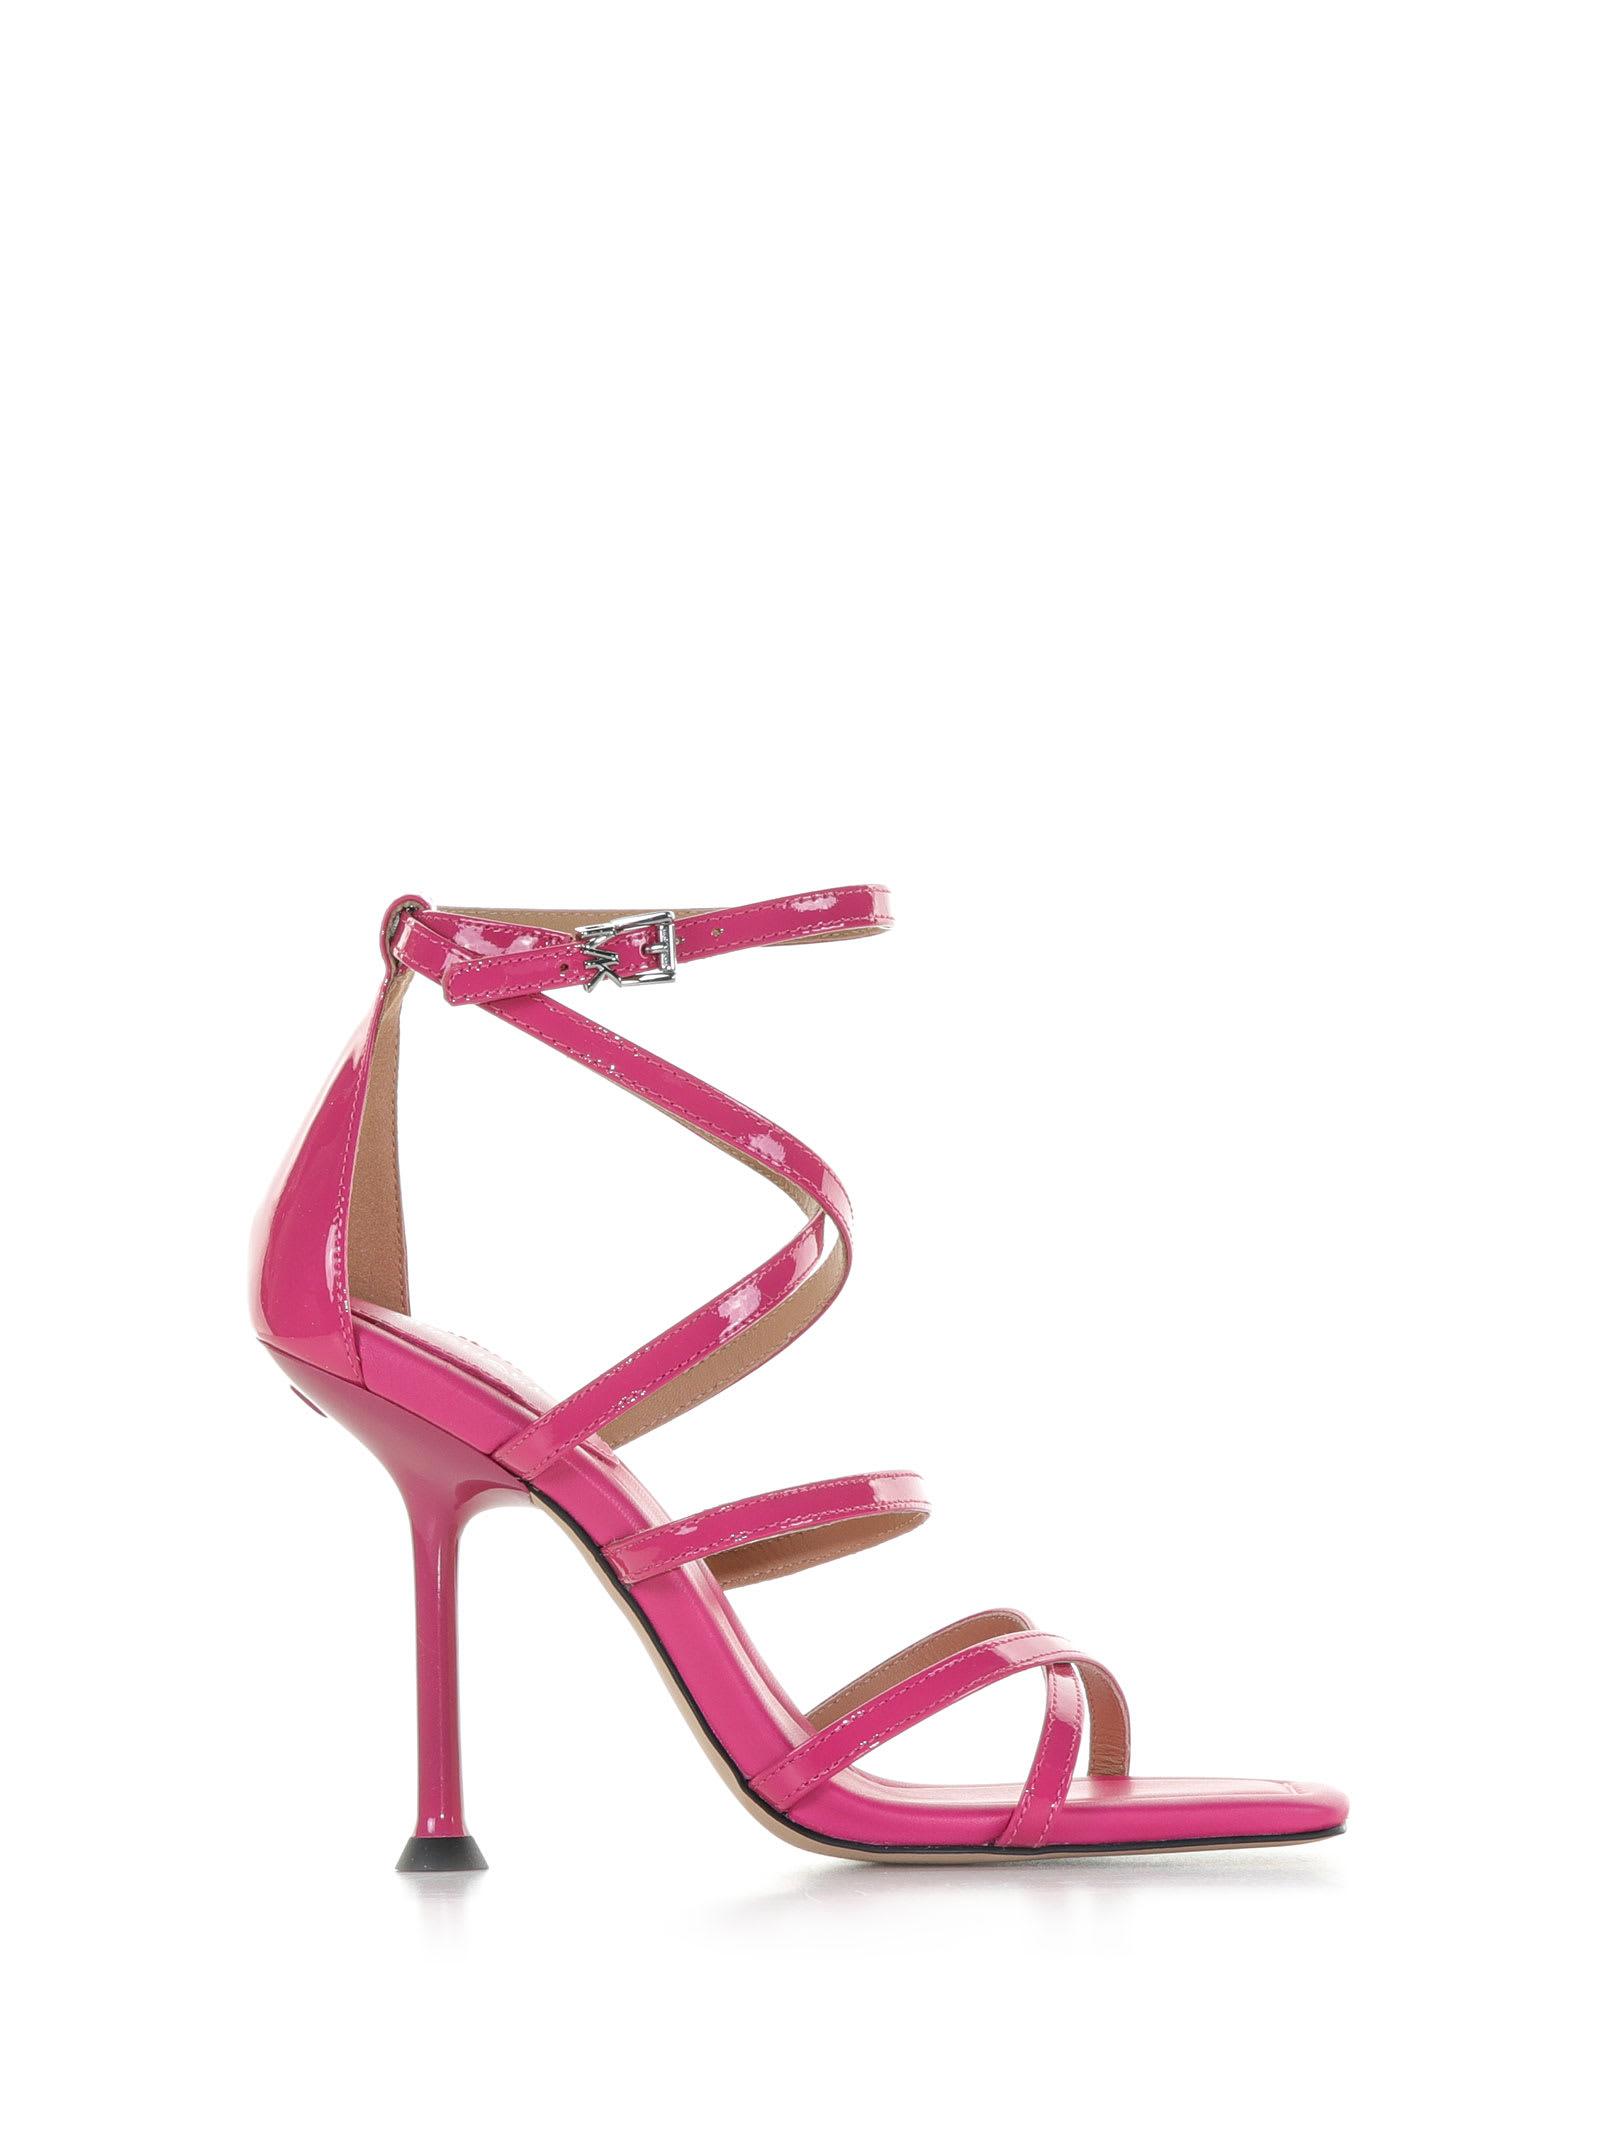 Michael Kors Imani Sandal In Patent Leather in Pink | Lyst